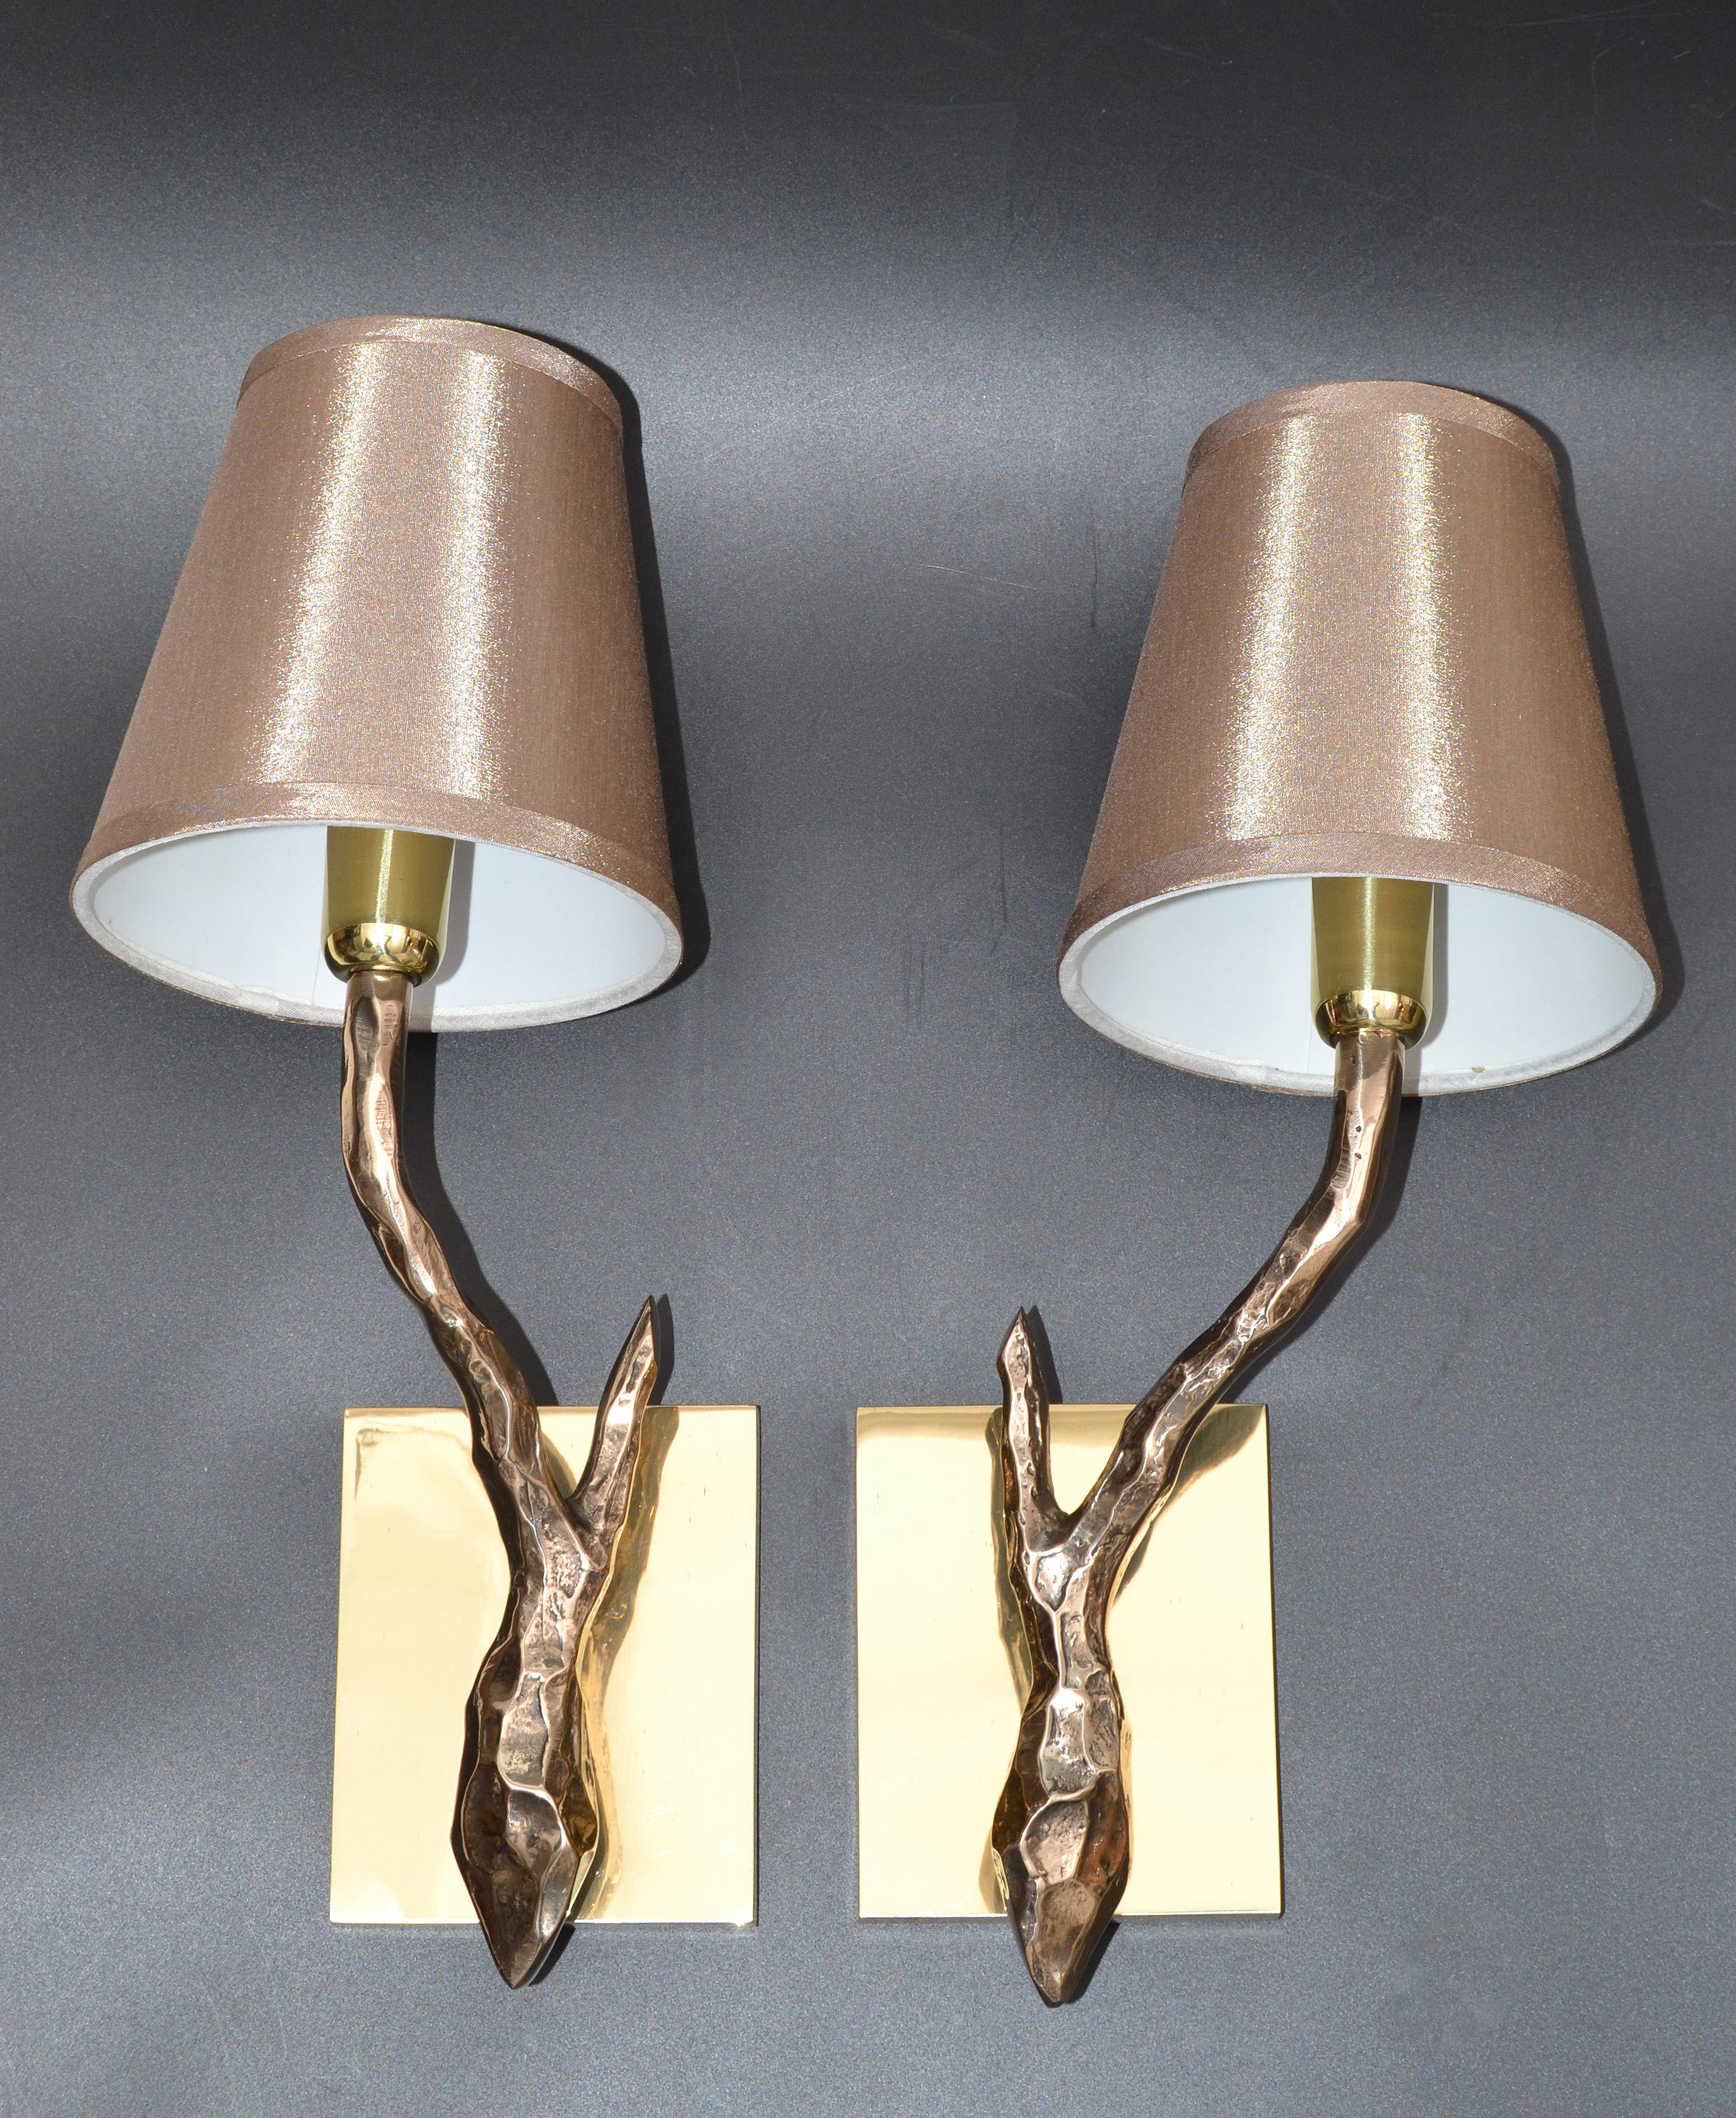 Pair of Agostini Style Sconces Bronze with Gold Metallic Shades, France, 1950s For Sale 6